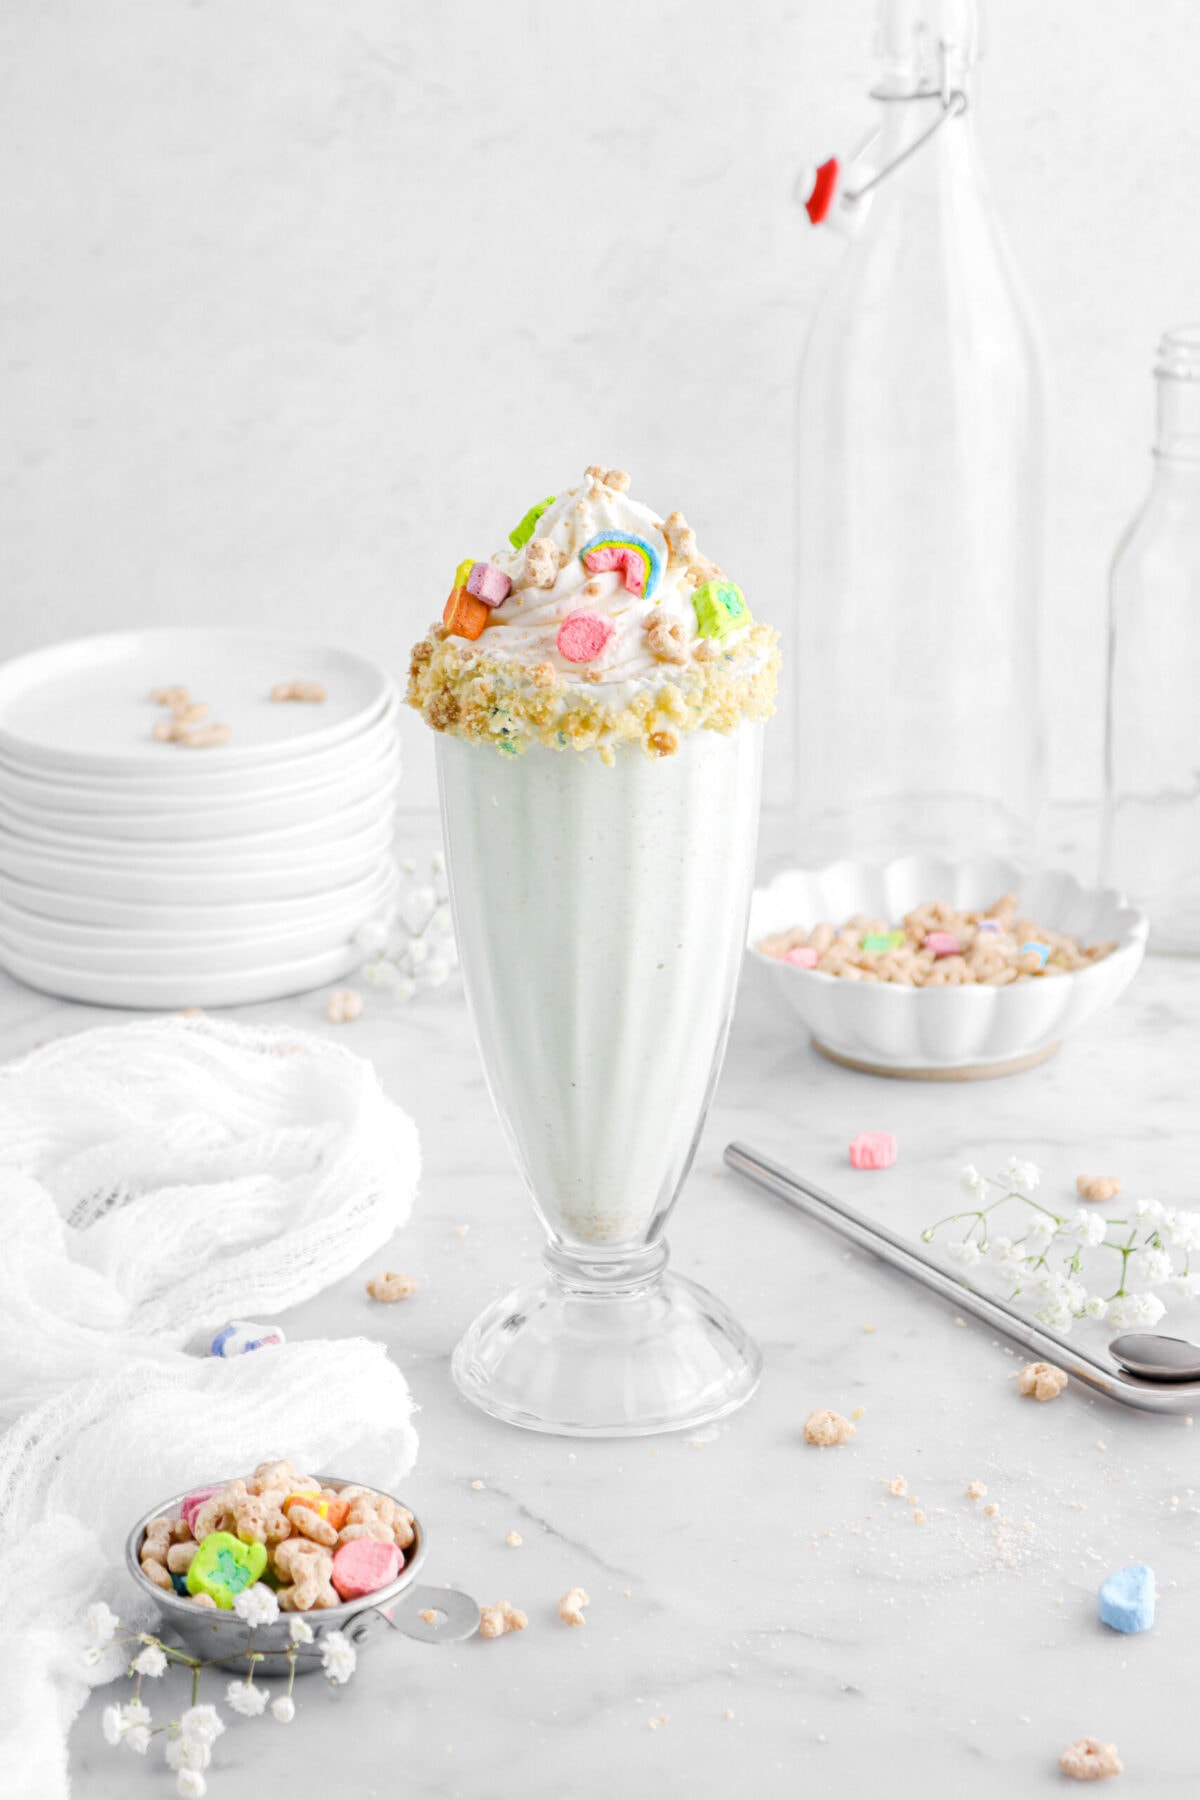 lucky charms milkshake in tall milkshake glass with a stack of plates, two empty glasses, and a scalloped bowl with cereal behind, a metal straw beside with a white cheese cloth.